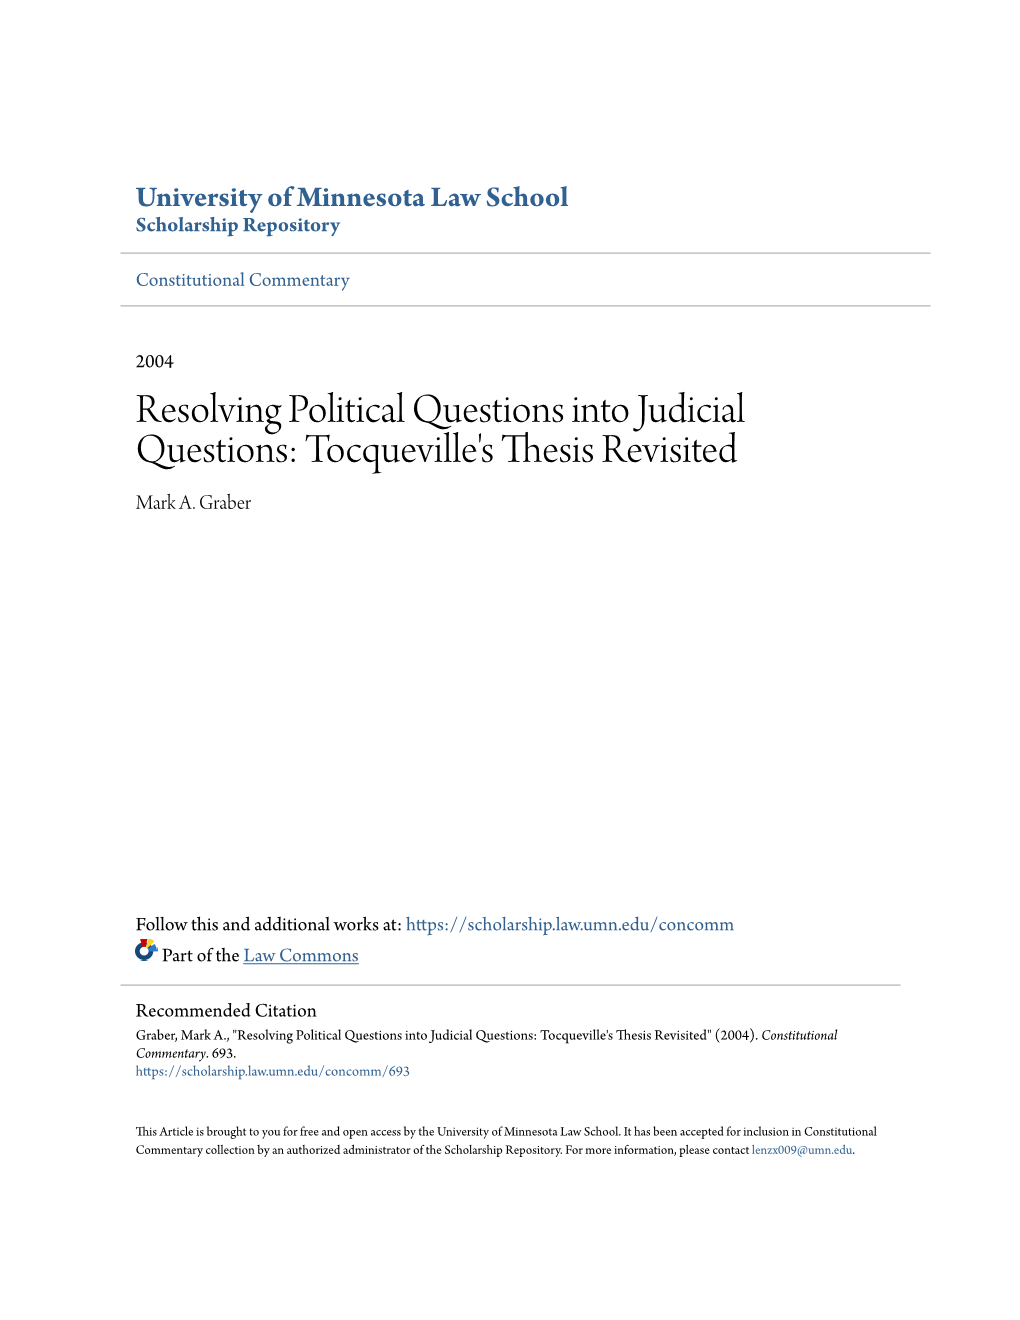 Resolving Political Questions Into Judicial Questions: Tocqueville's Thesis Revisited Mark A